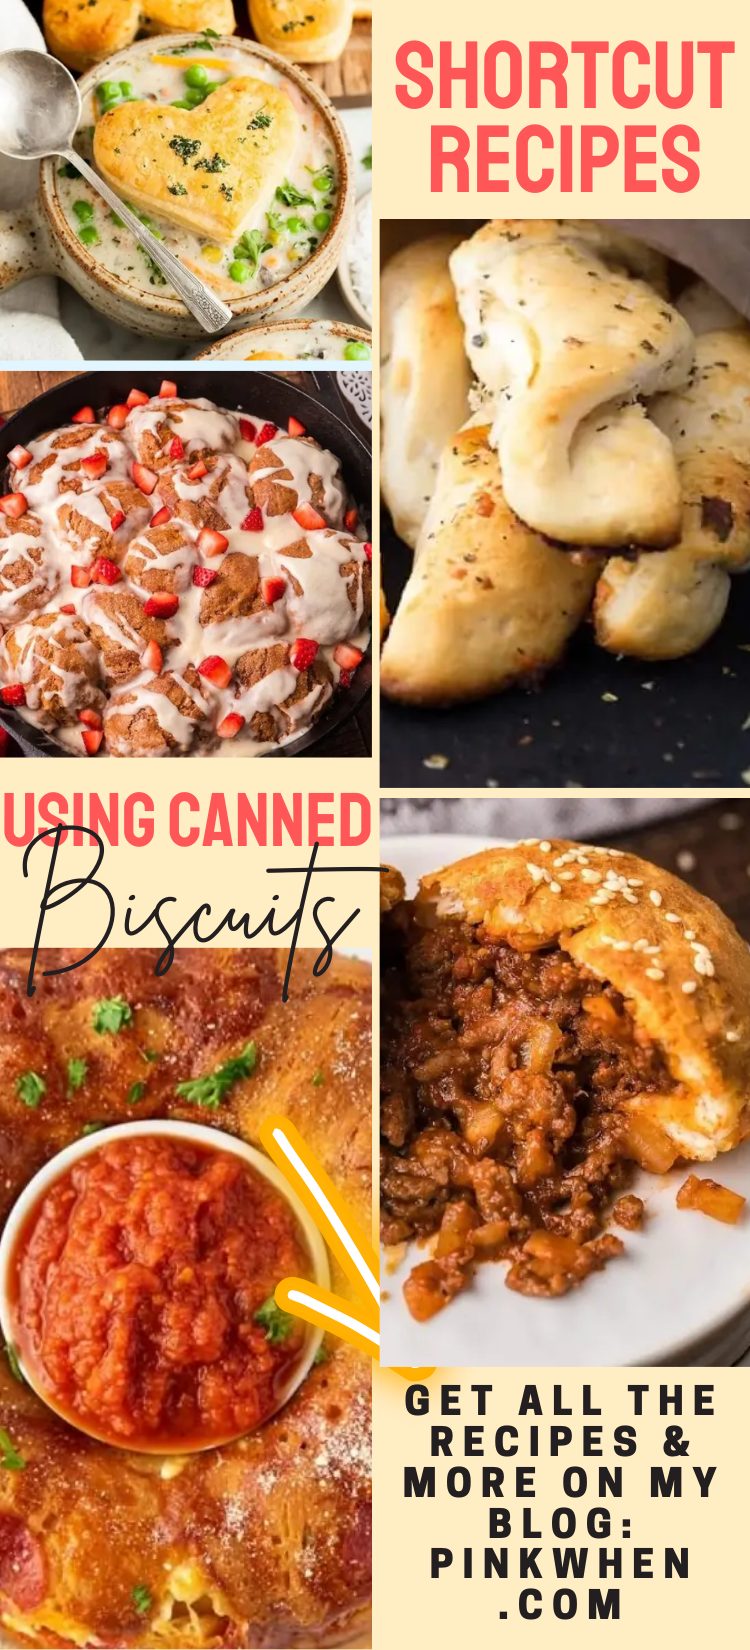 Shortcut Recipes Using Canned Biscuits